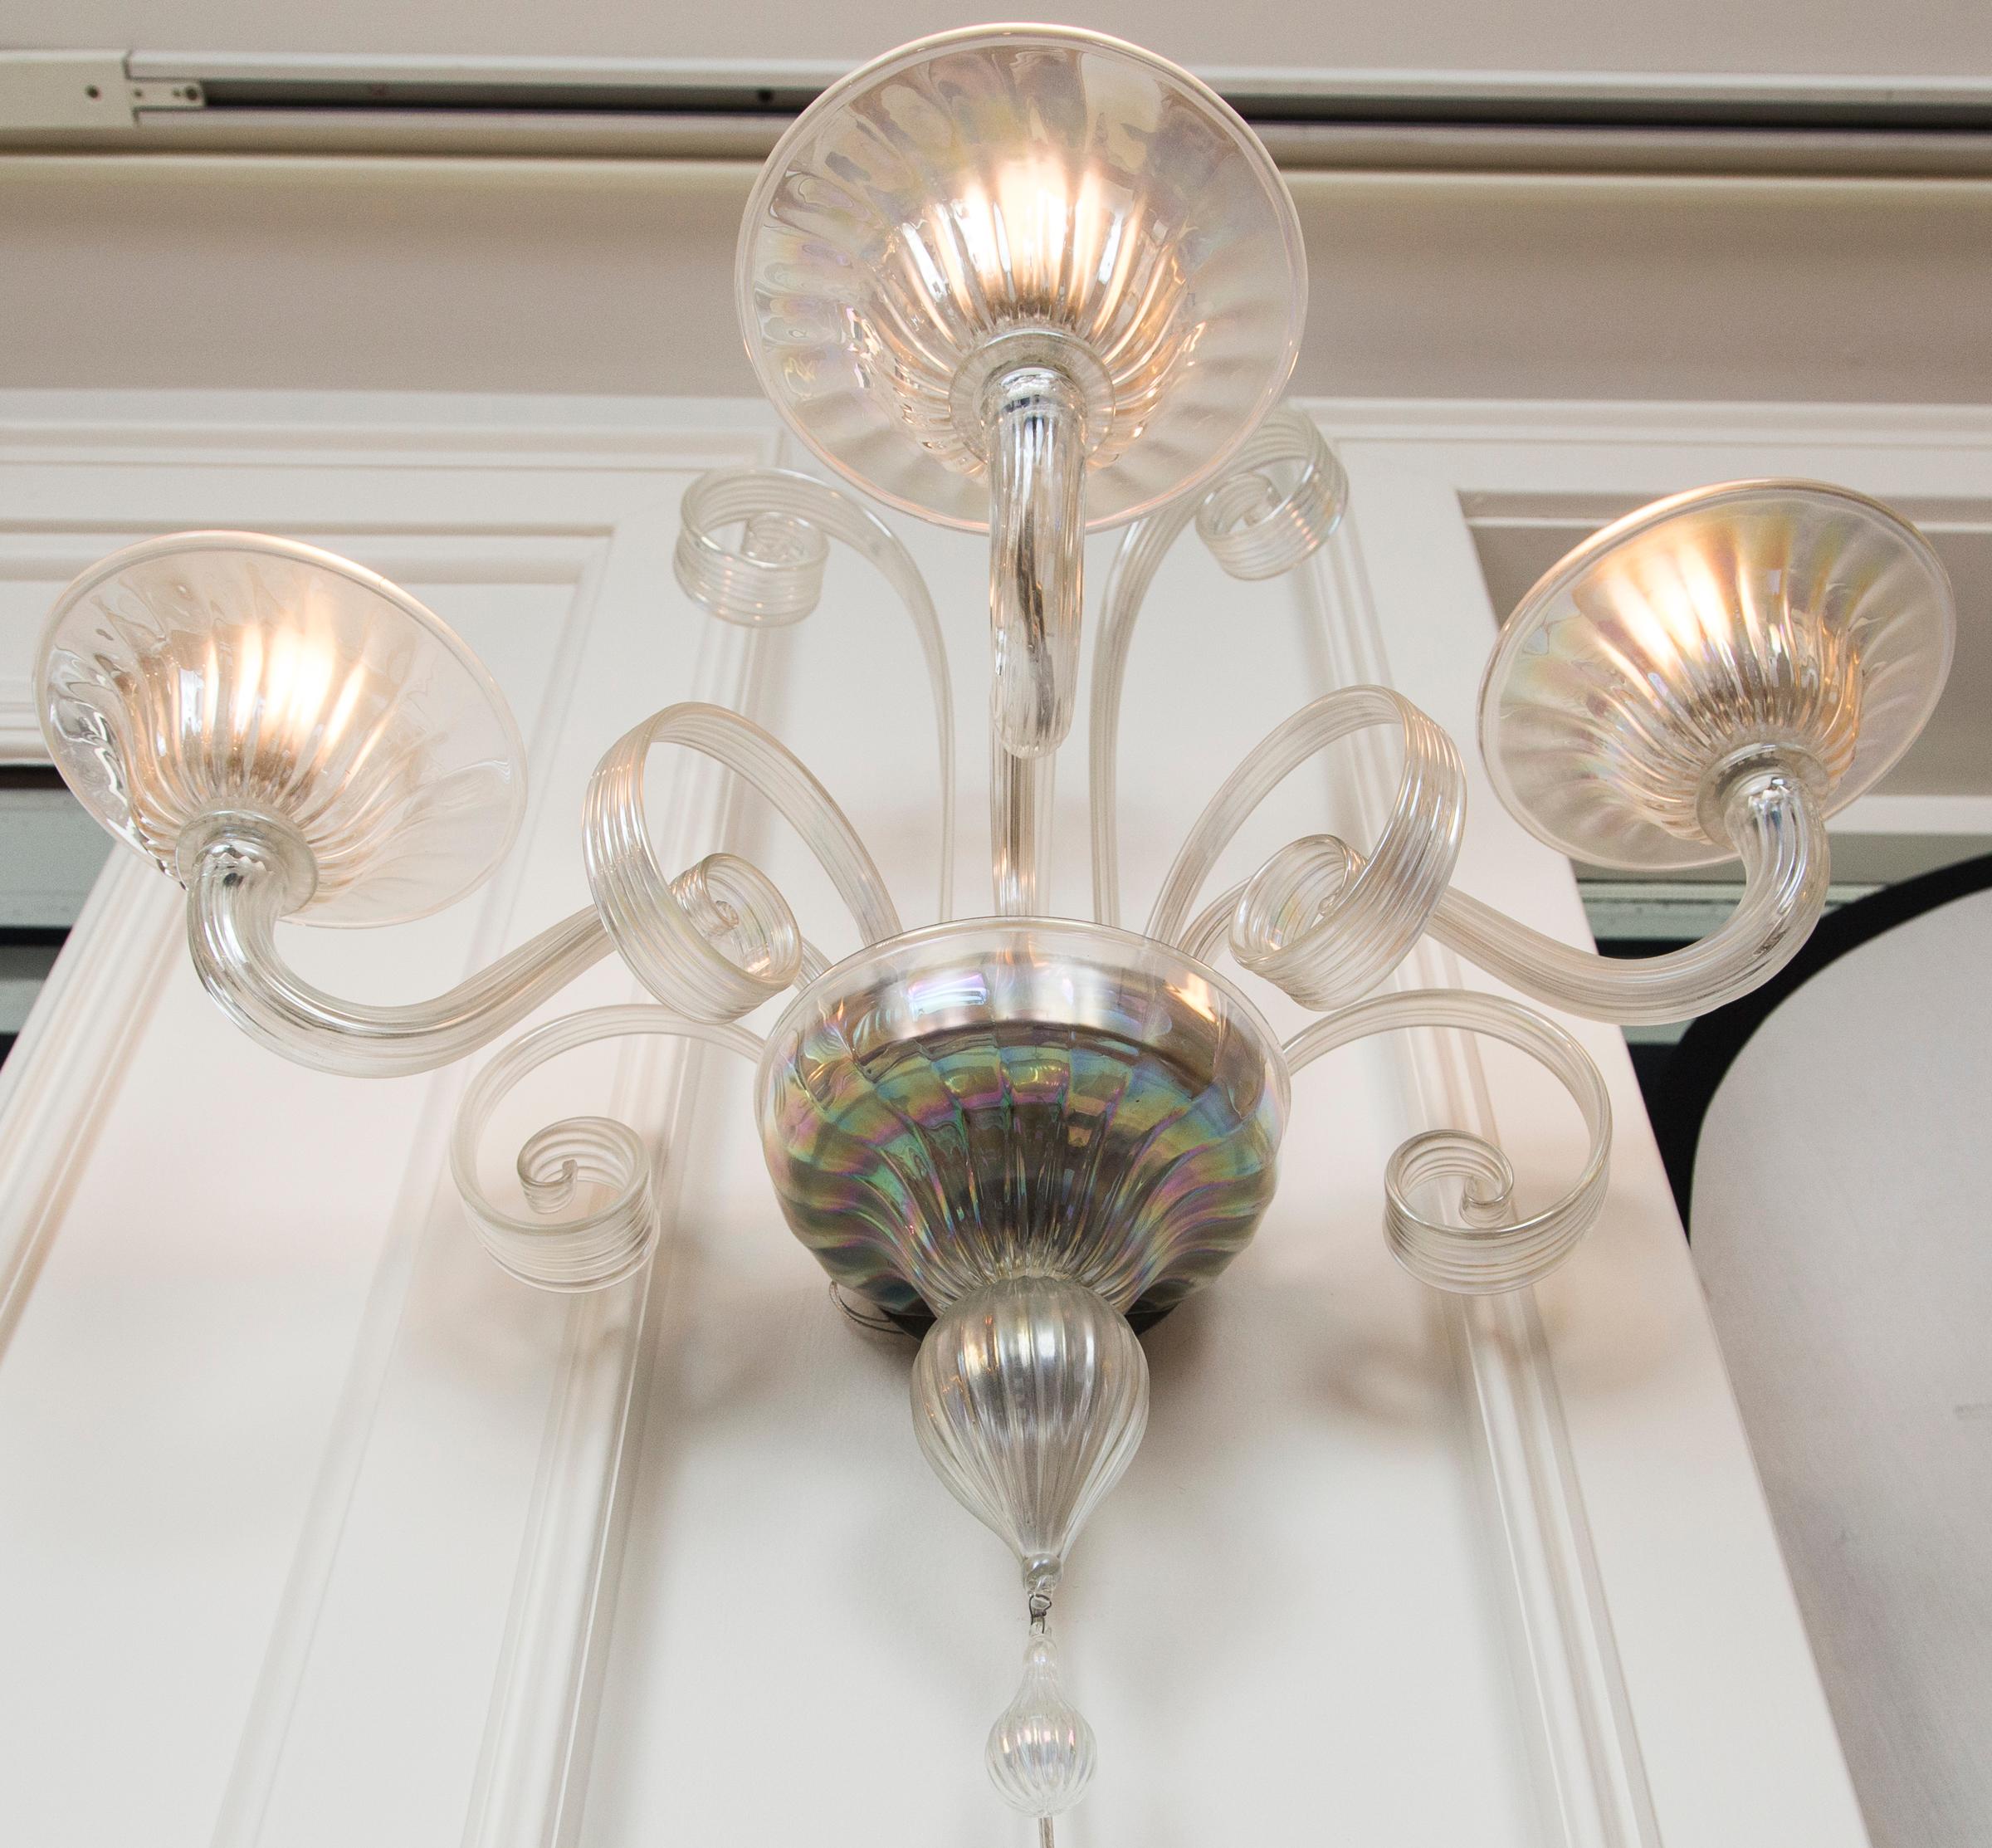 Pair of Large Classical Iridescent Three Arm Wall Lights In Excellent Condition For Sale In Westport, CT